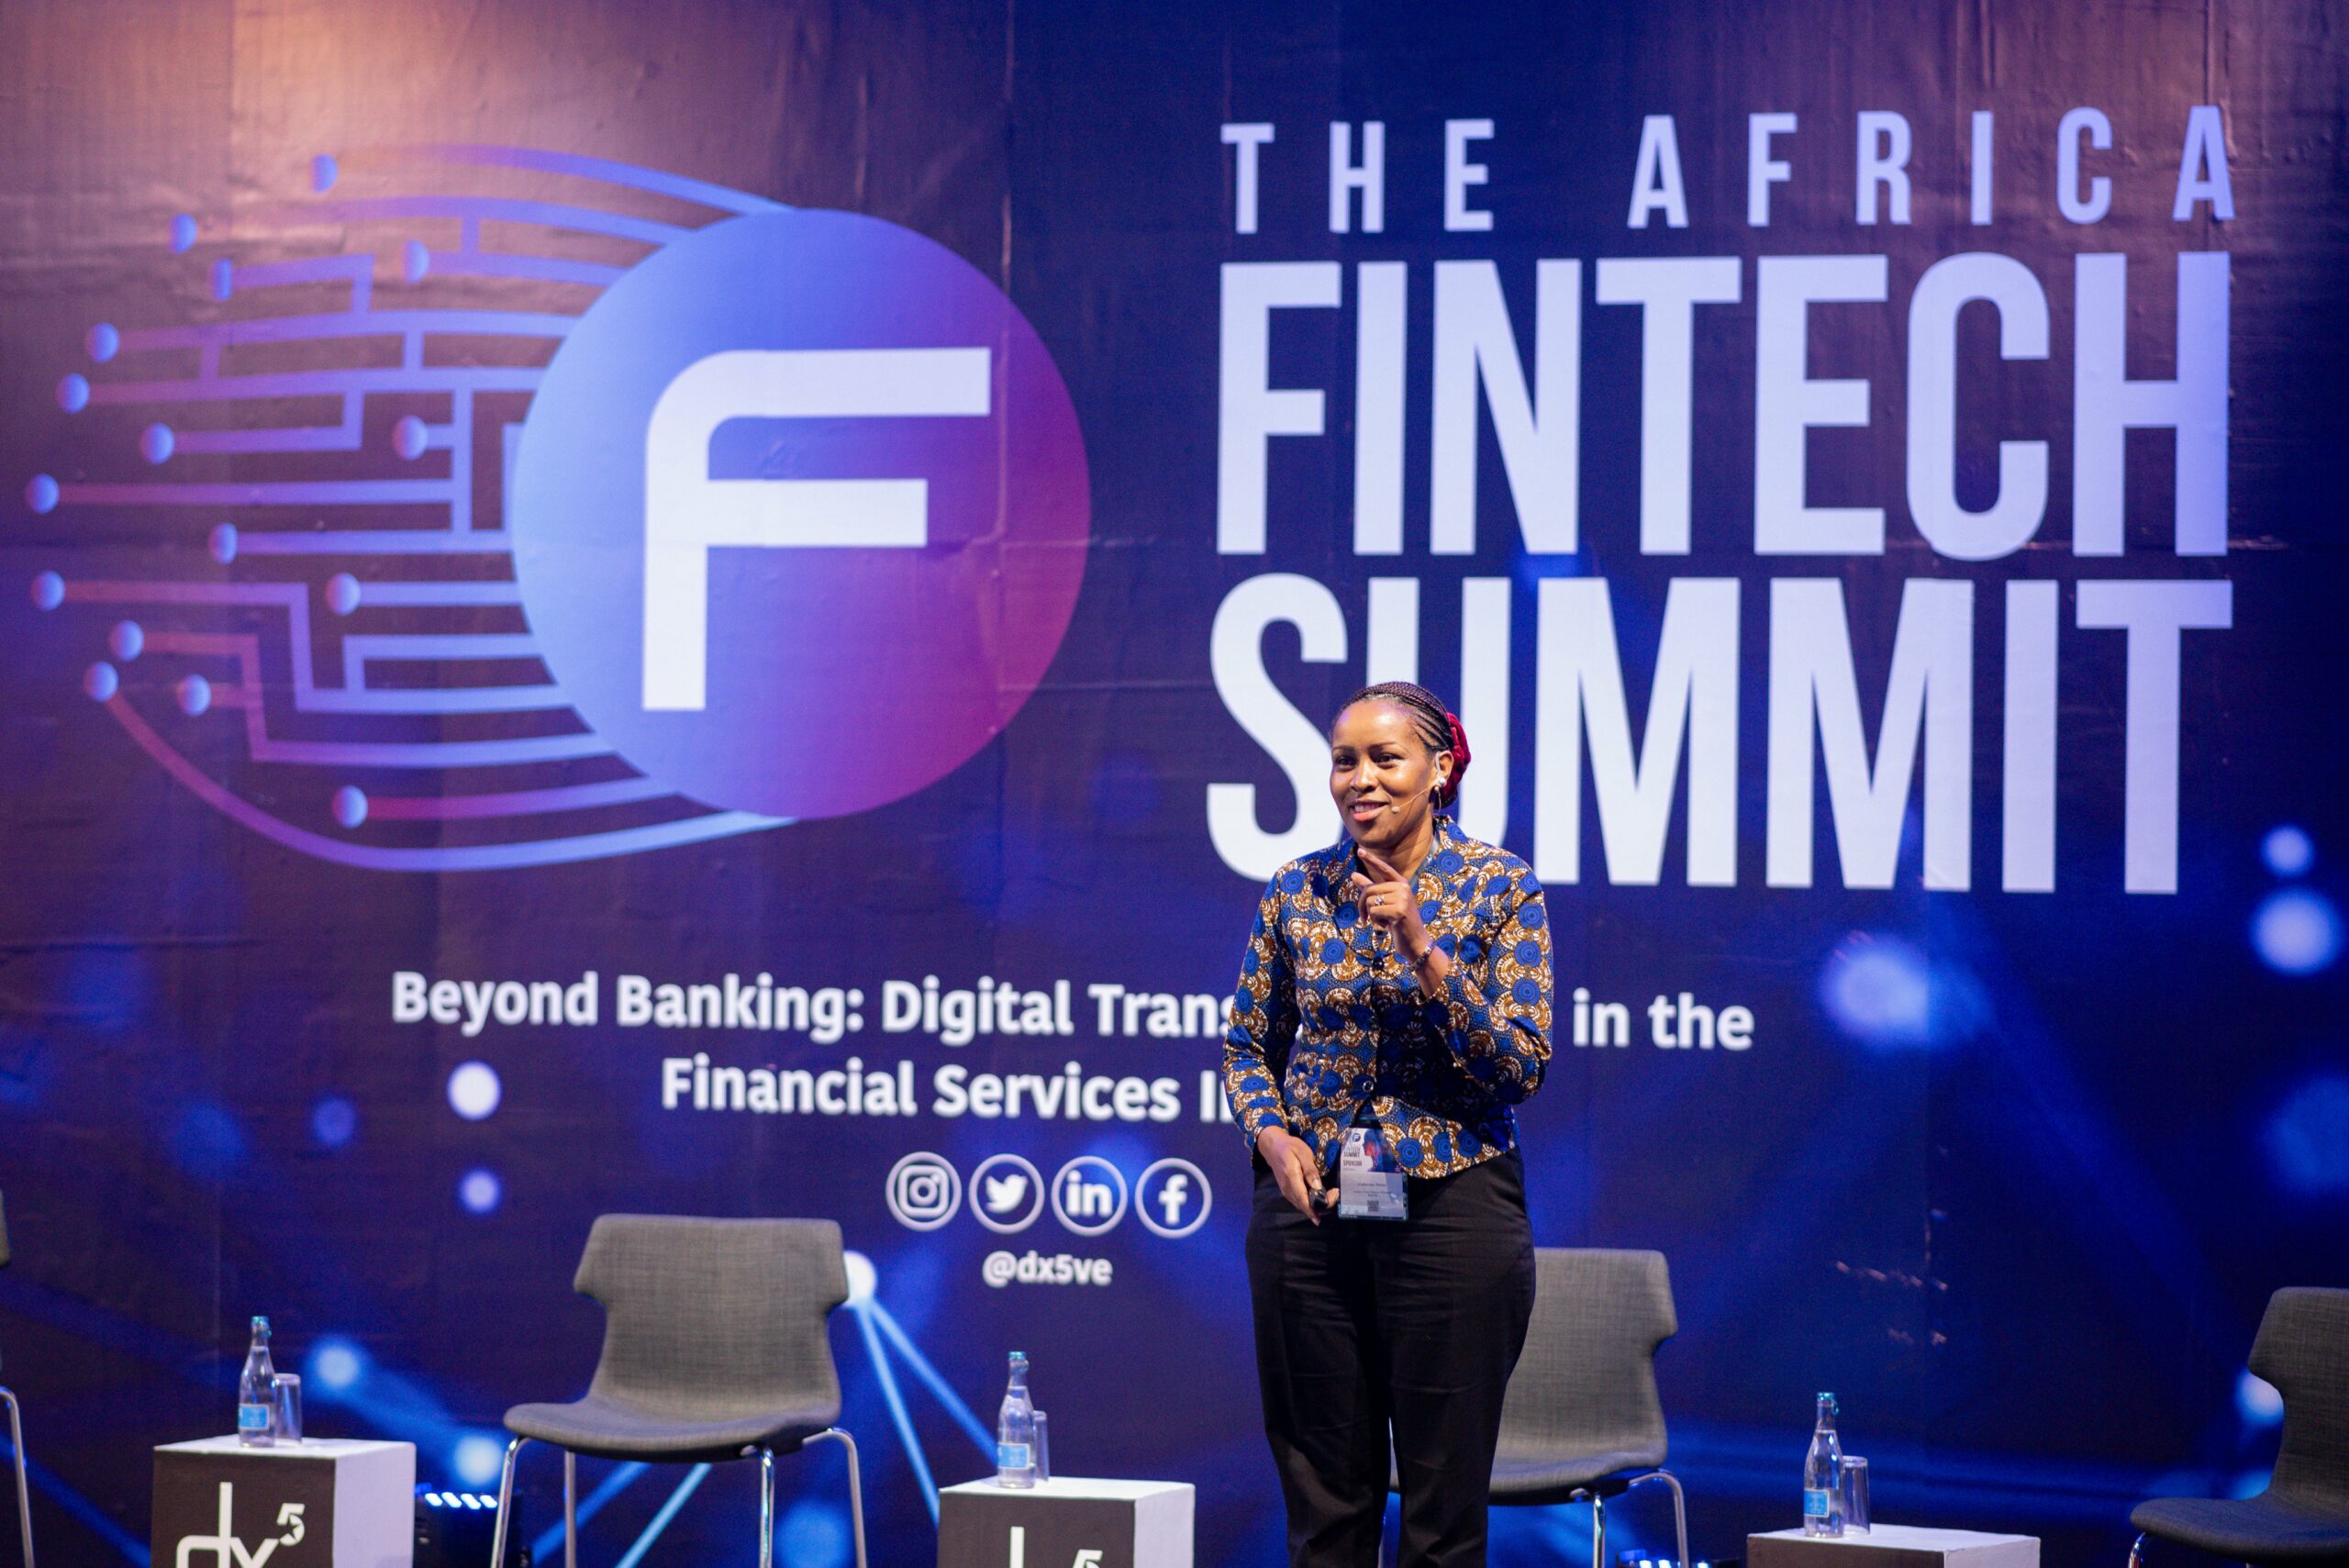 Africa Fintech Summit: Are Banks Ready For Digital Transformation?